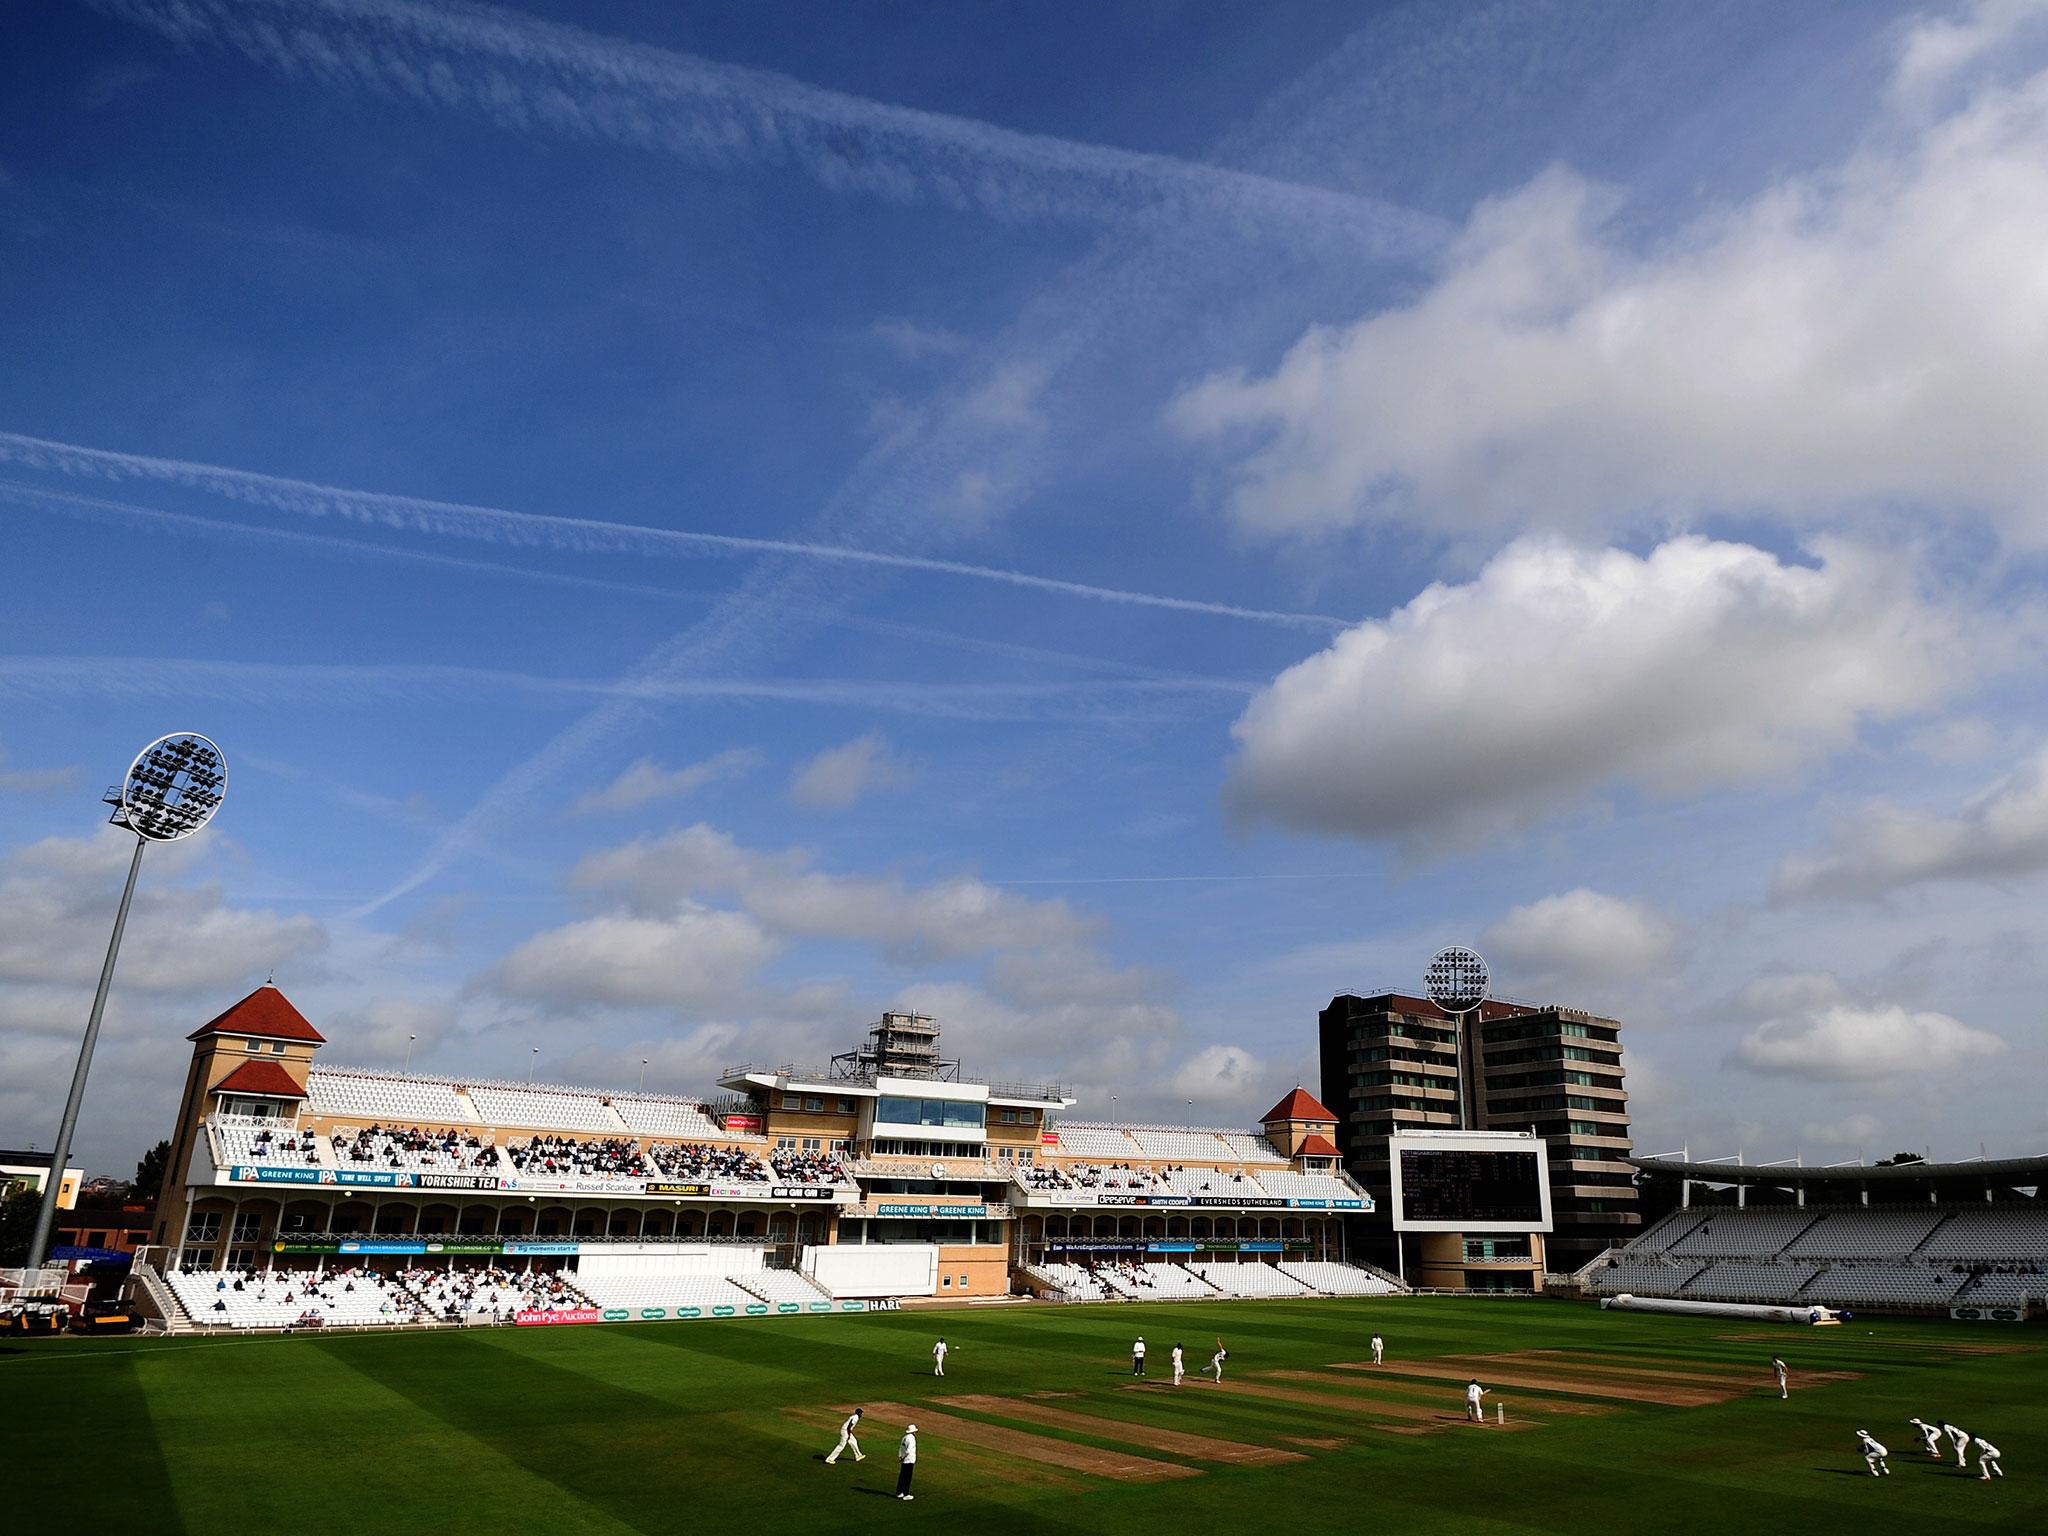 Trent Bridge hosted the Ashes in 2013 and 2015